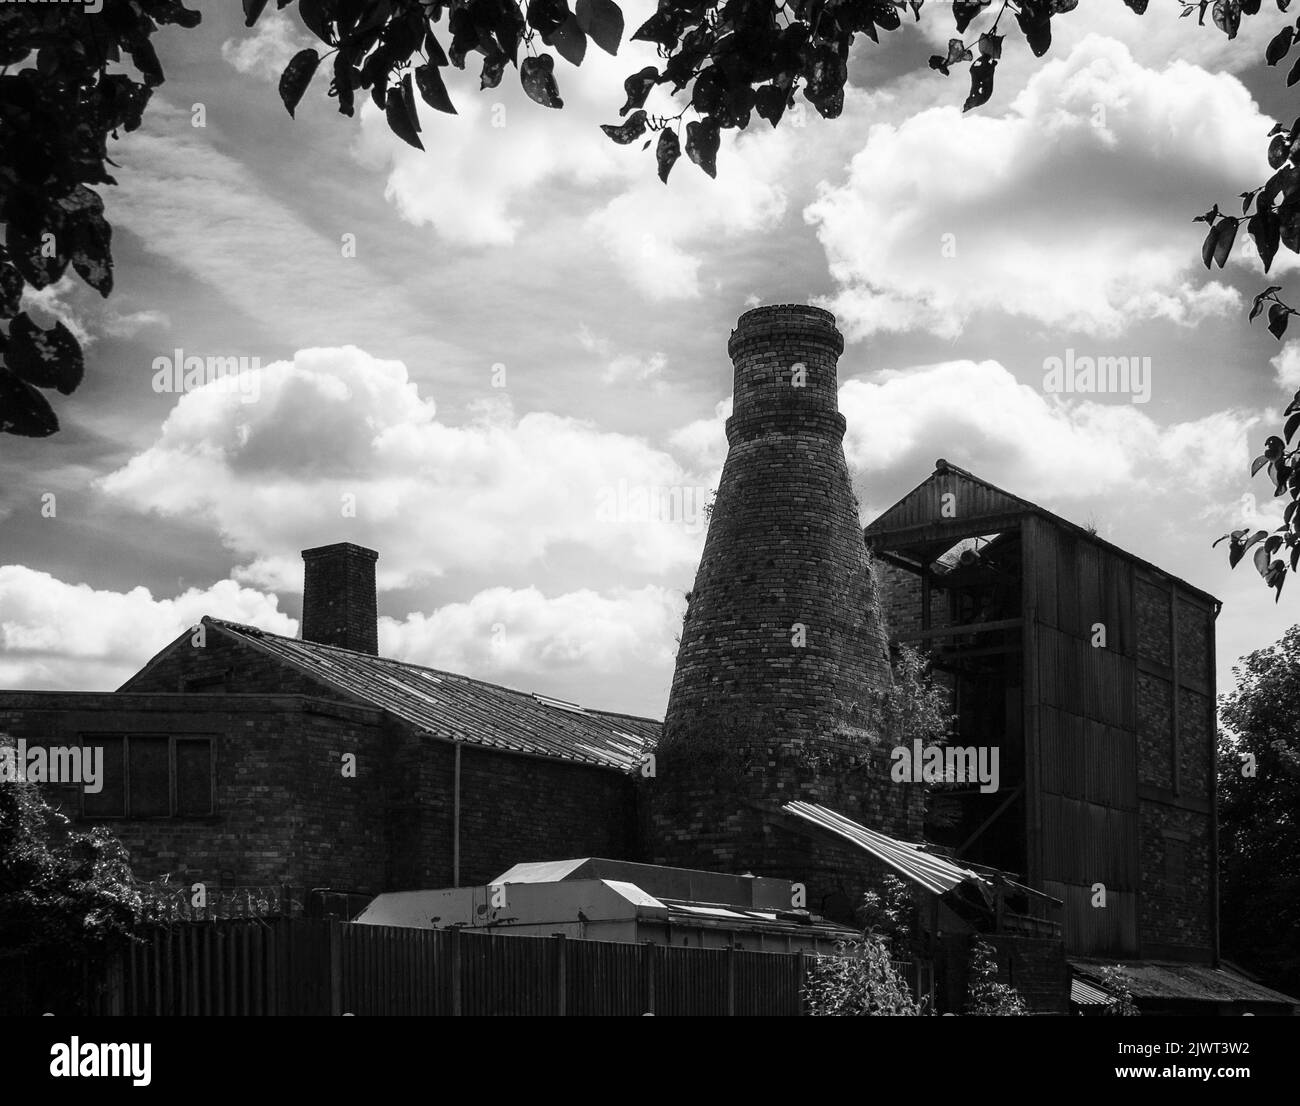 An old pottery silhouetted against bright clouds. Featuring the history of Stoke on Trent in monochrome Stock Photo